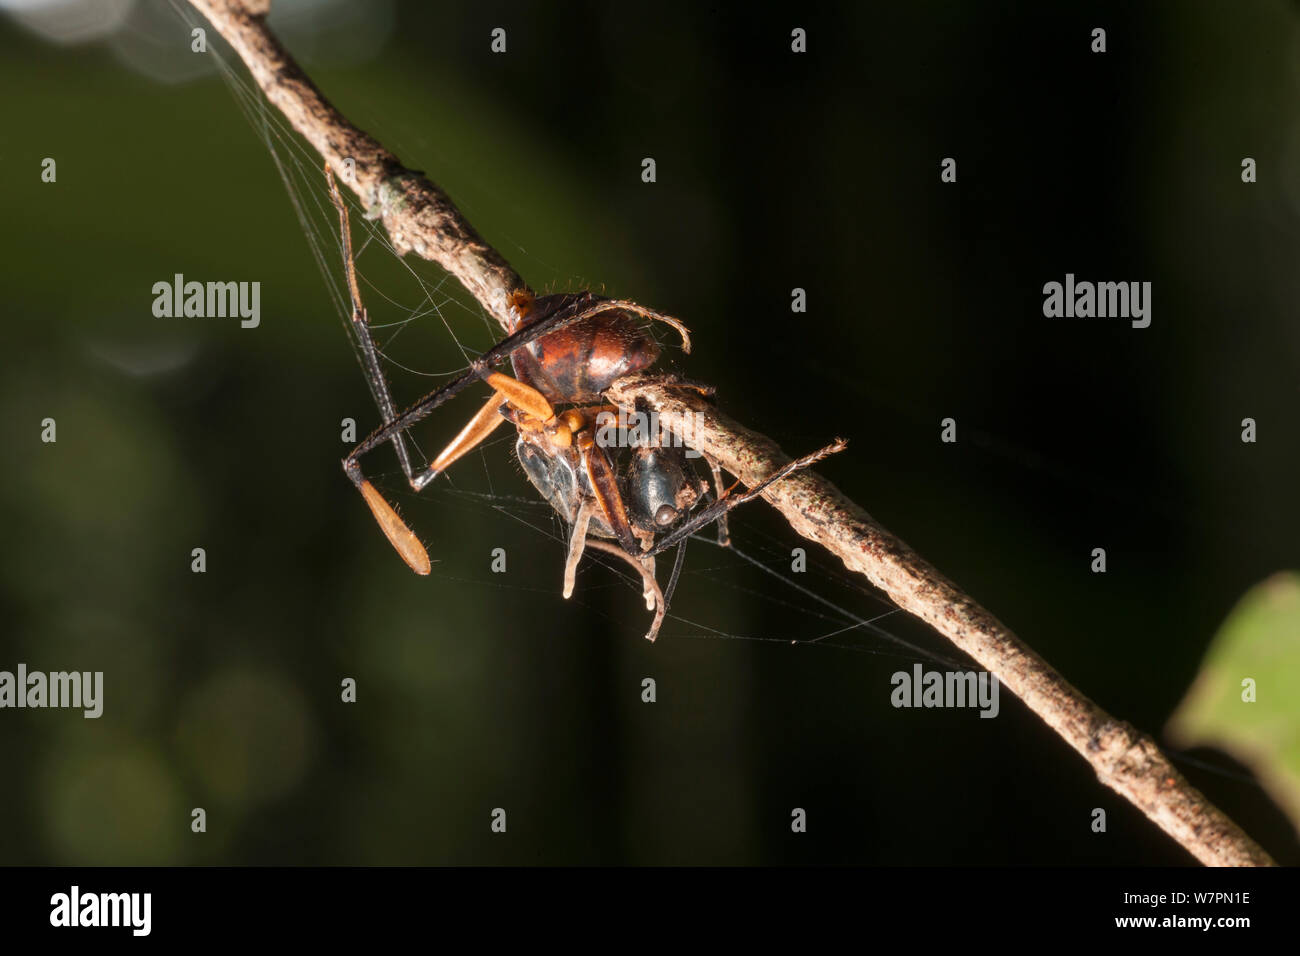 Dead ant (Formicidae sp) infected by  Ophiocordyceps fungus. Tanjung Puting National Park, Borneo, Central Kalimantan, Indonesia Stock Photo